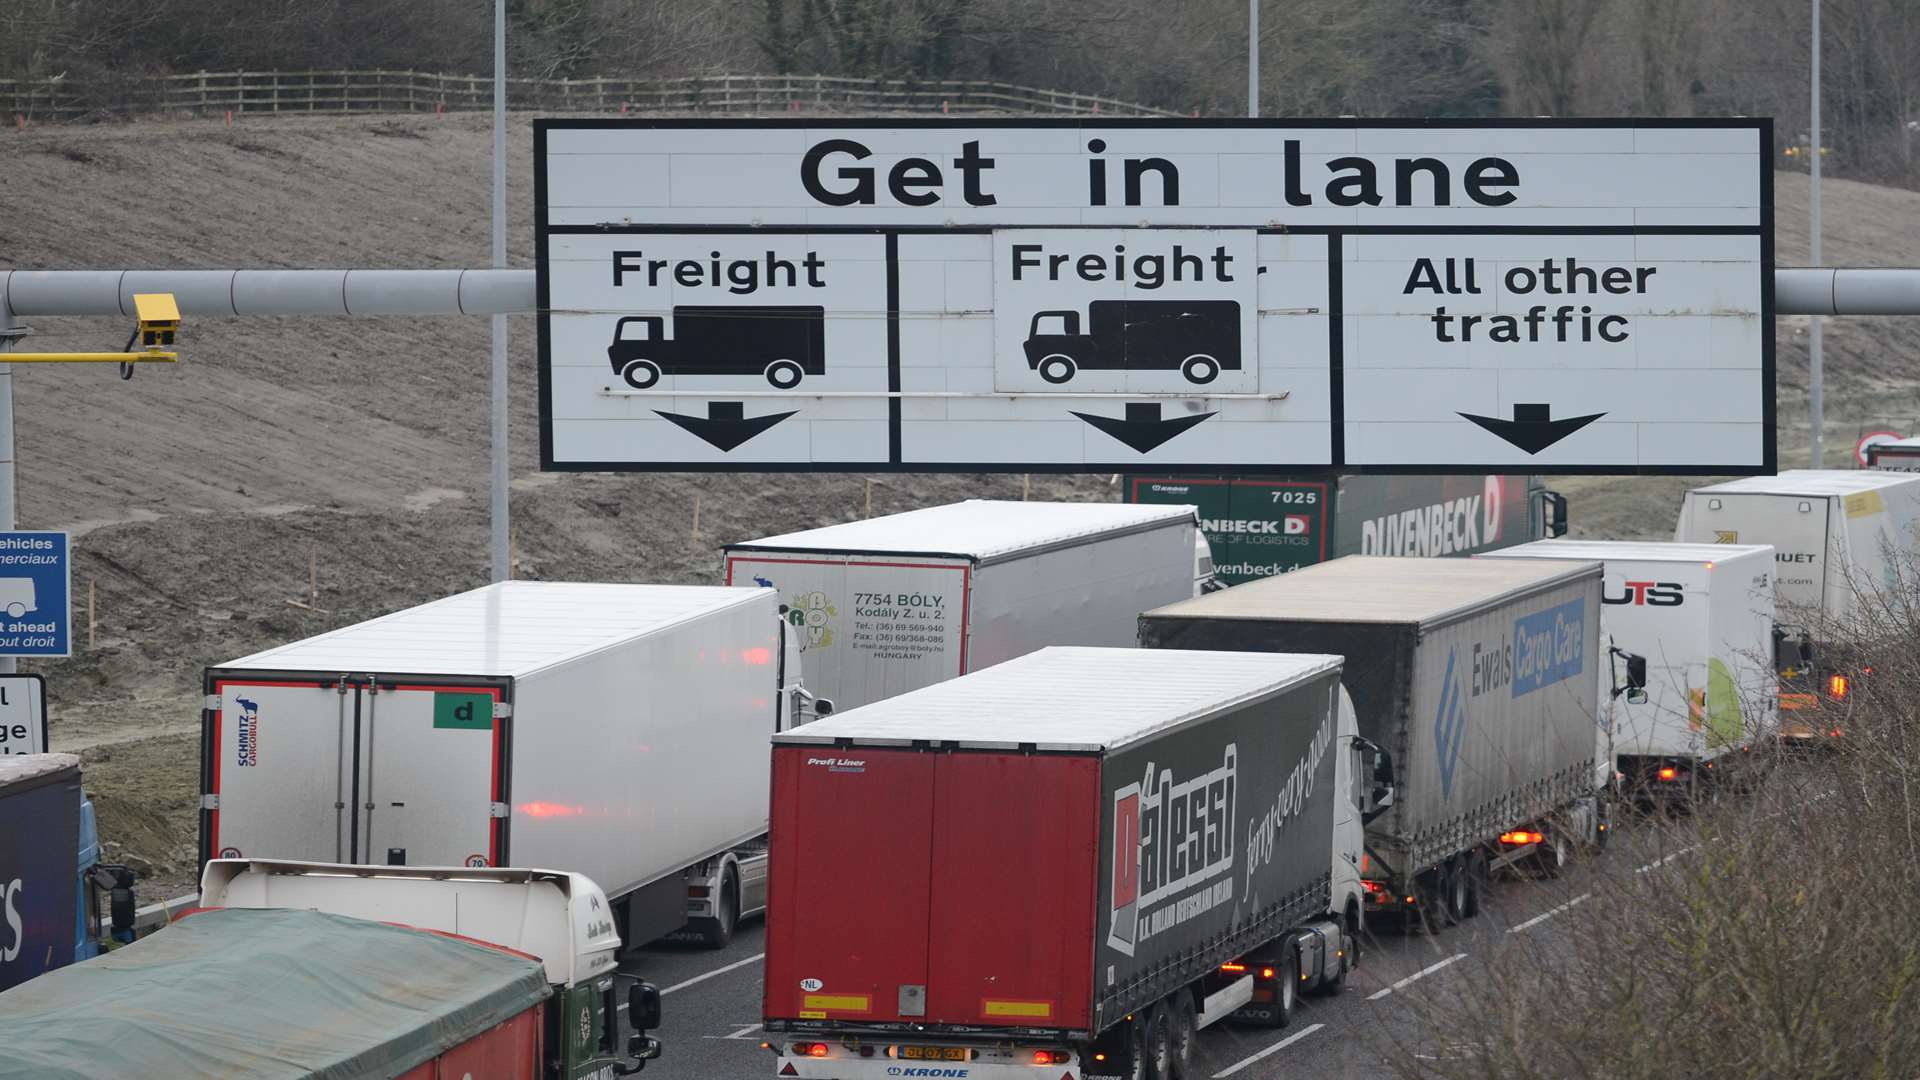 Previous delays at the entrance to Eurotunnel have led to Operation Stack on the M20.